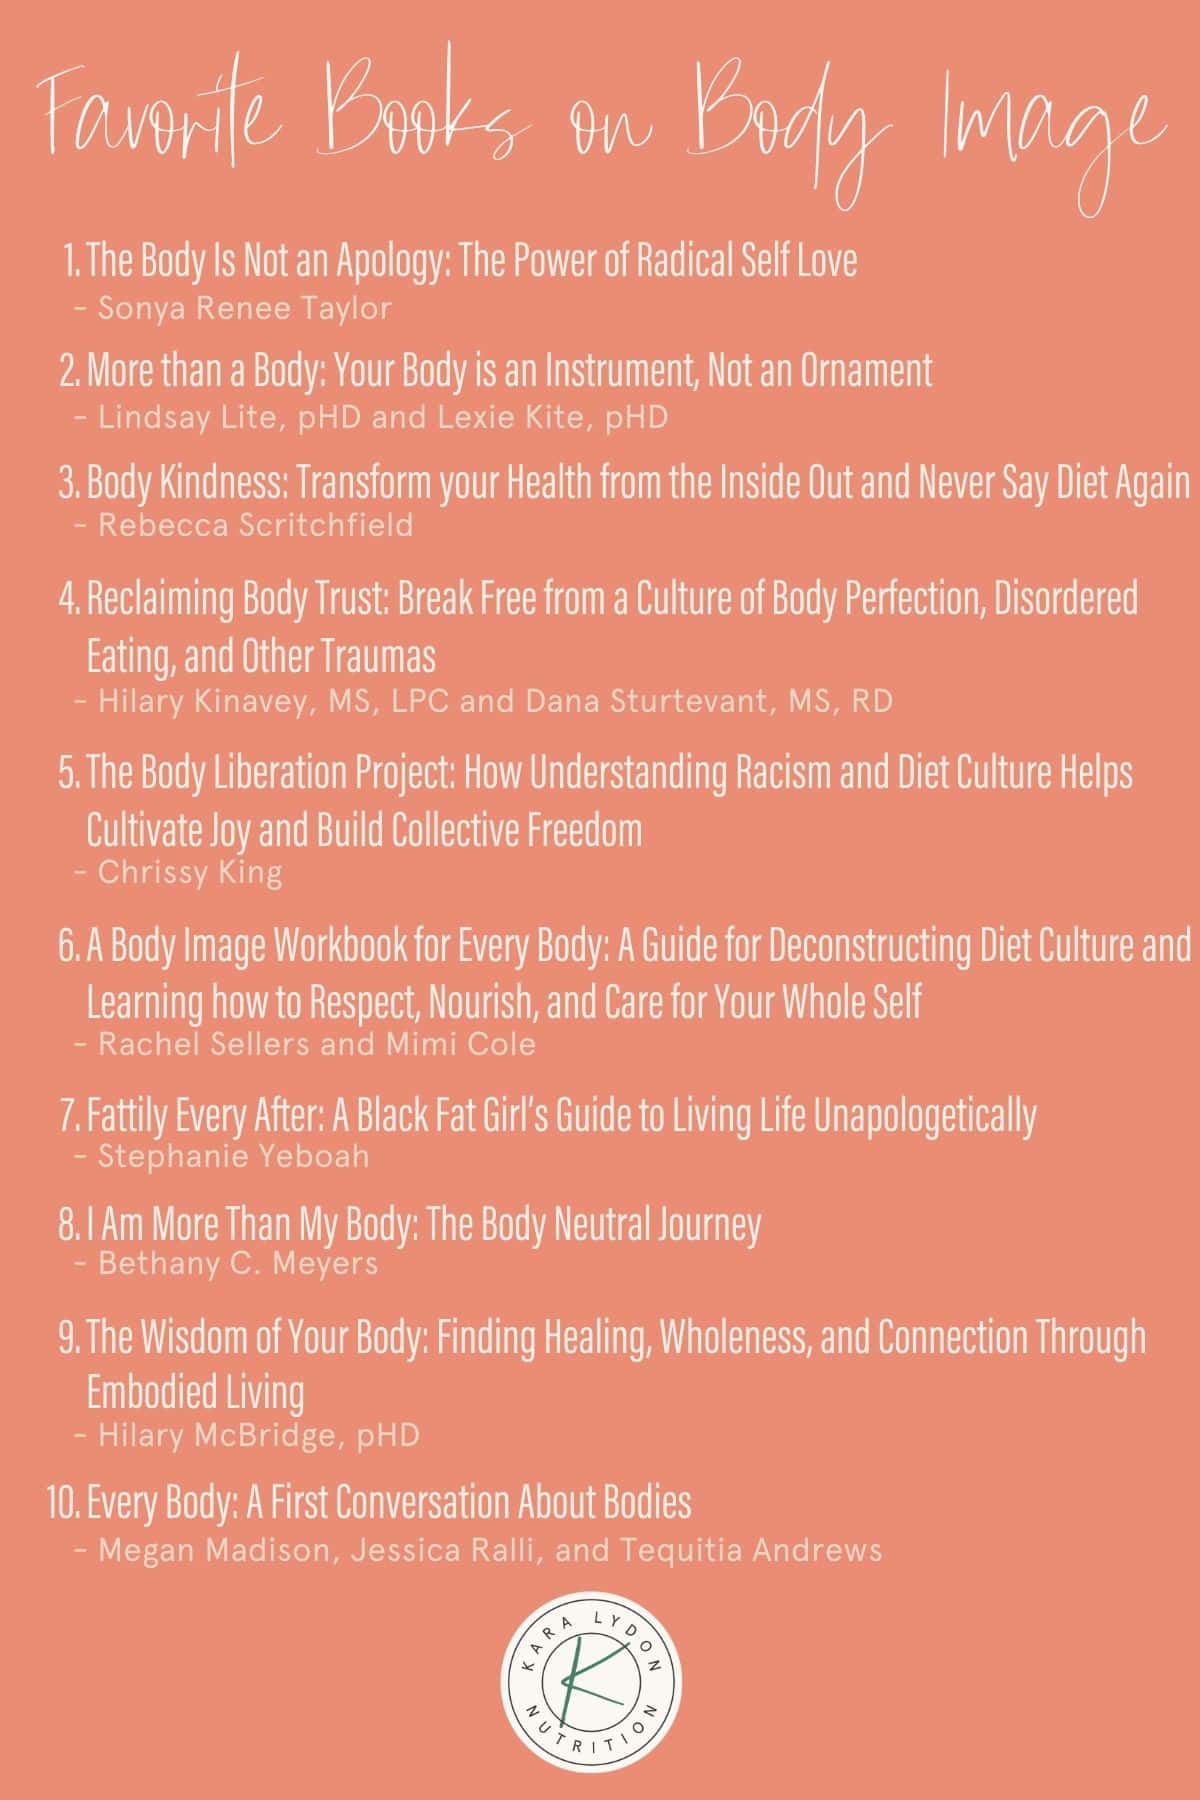 Graphic listing 10 Favorite Books on Body Image